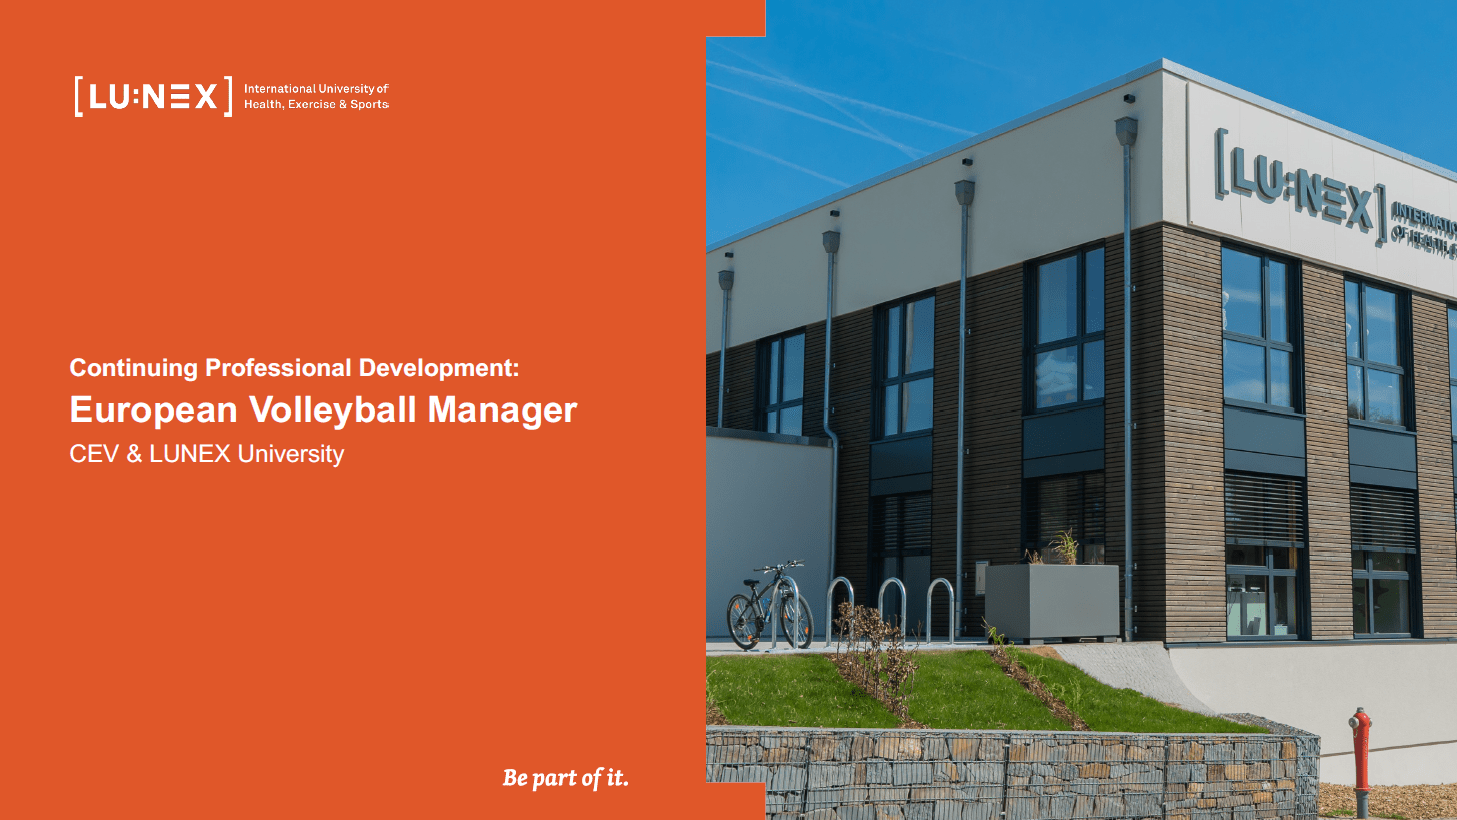 Paving the Way: Allcoat Completes CEV European Volleyball Manager Course 